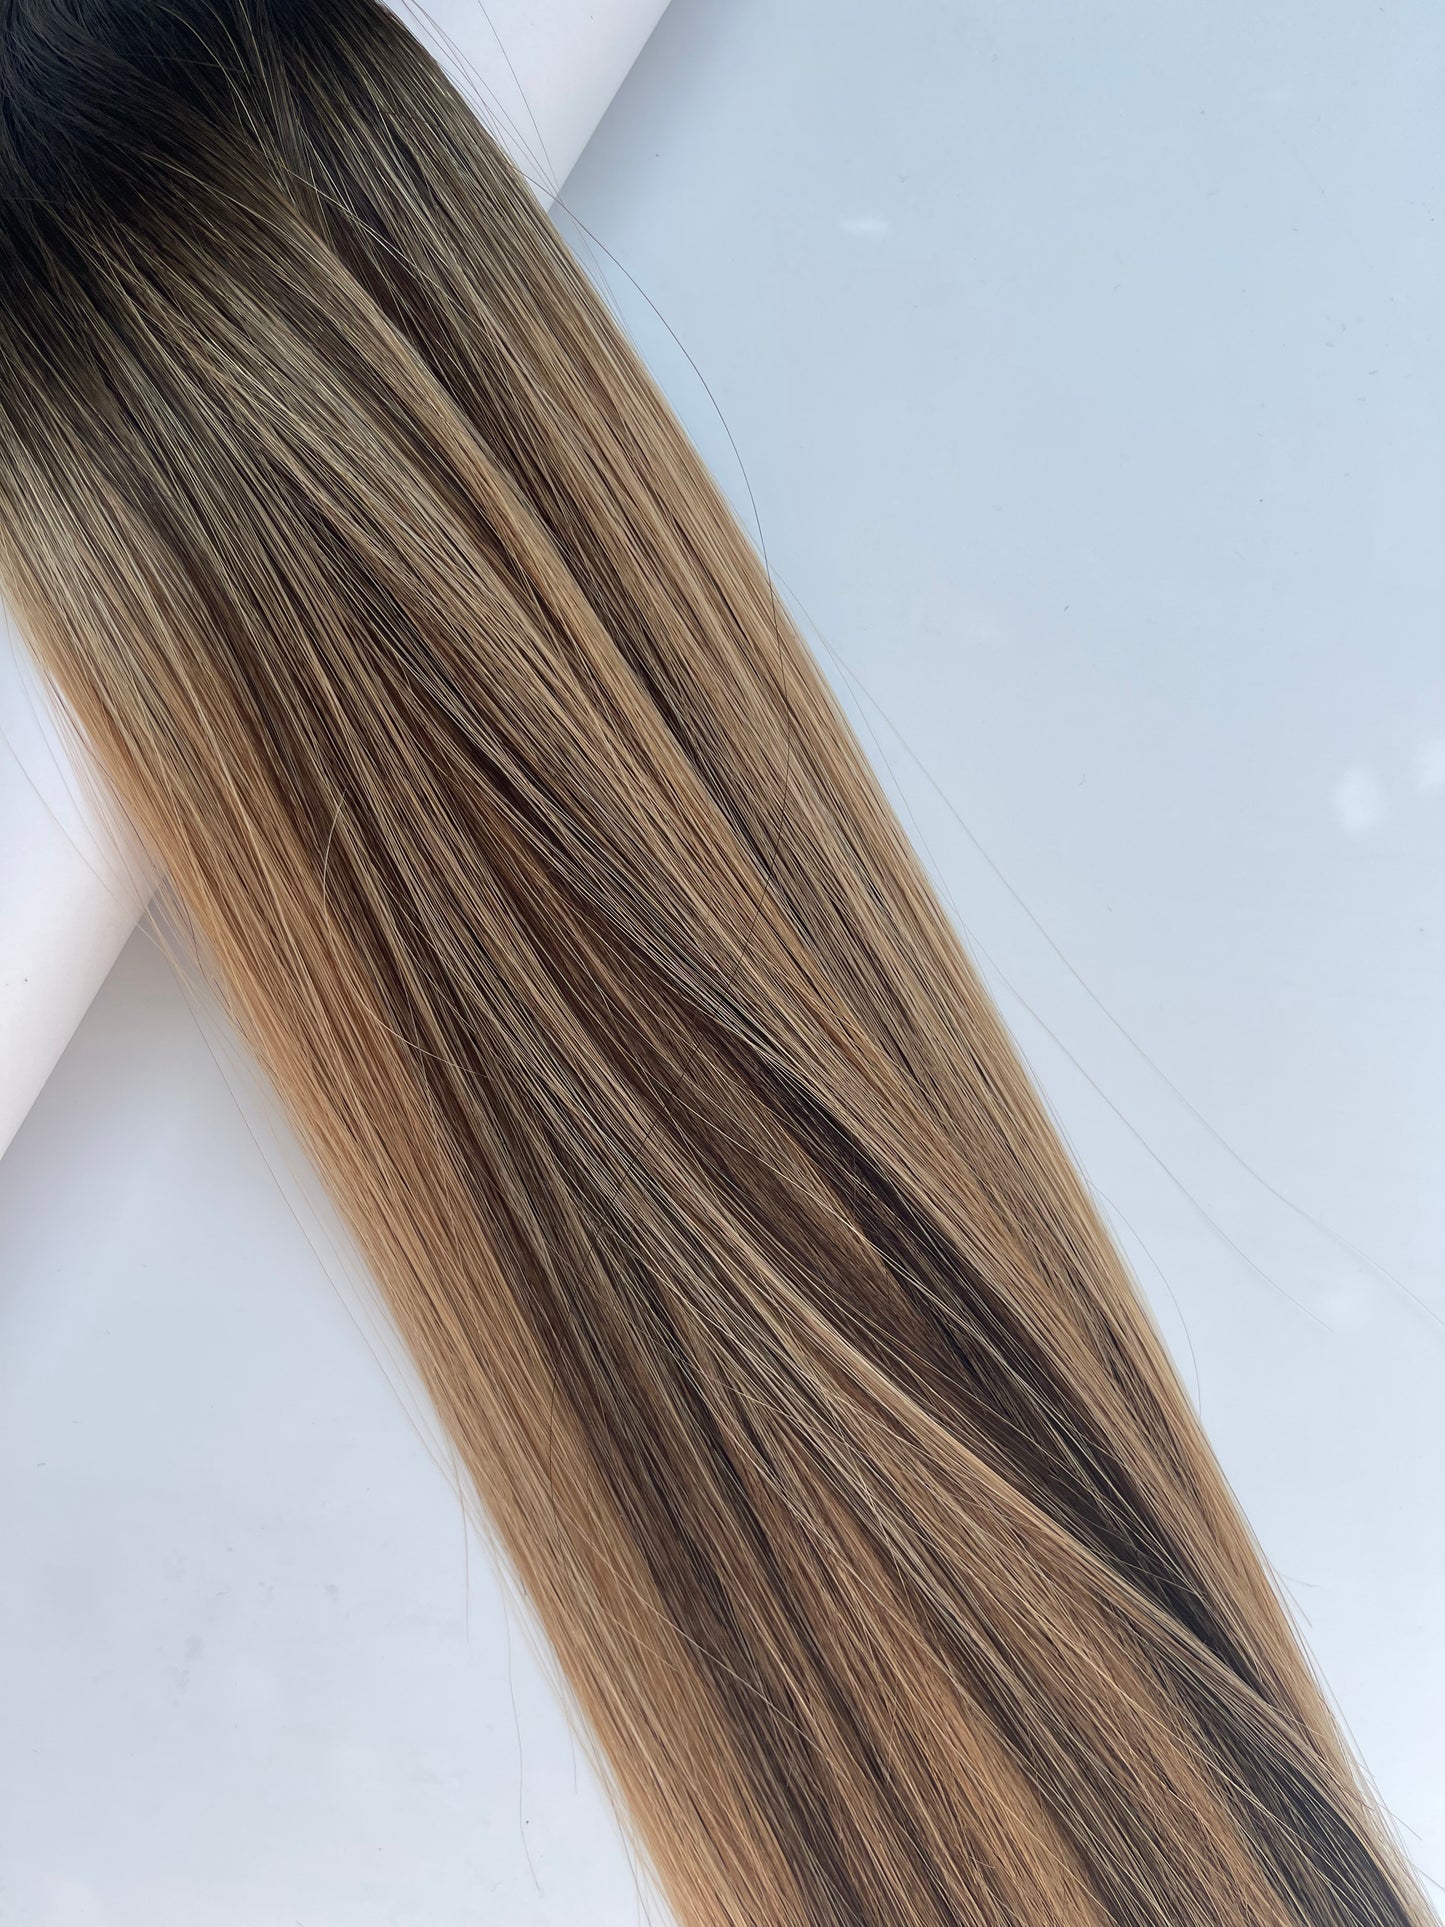 WEFT | HUMAN HAIR EXTENSIONS | WEFT | CONFESSIONS | 24"